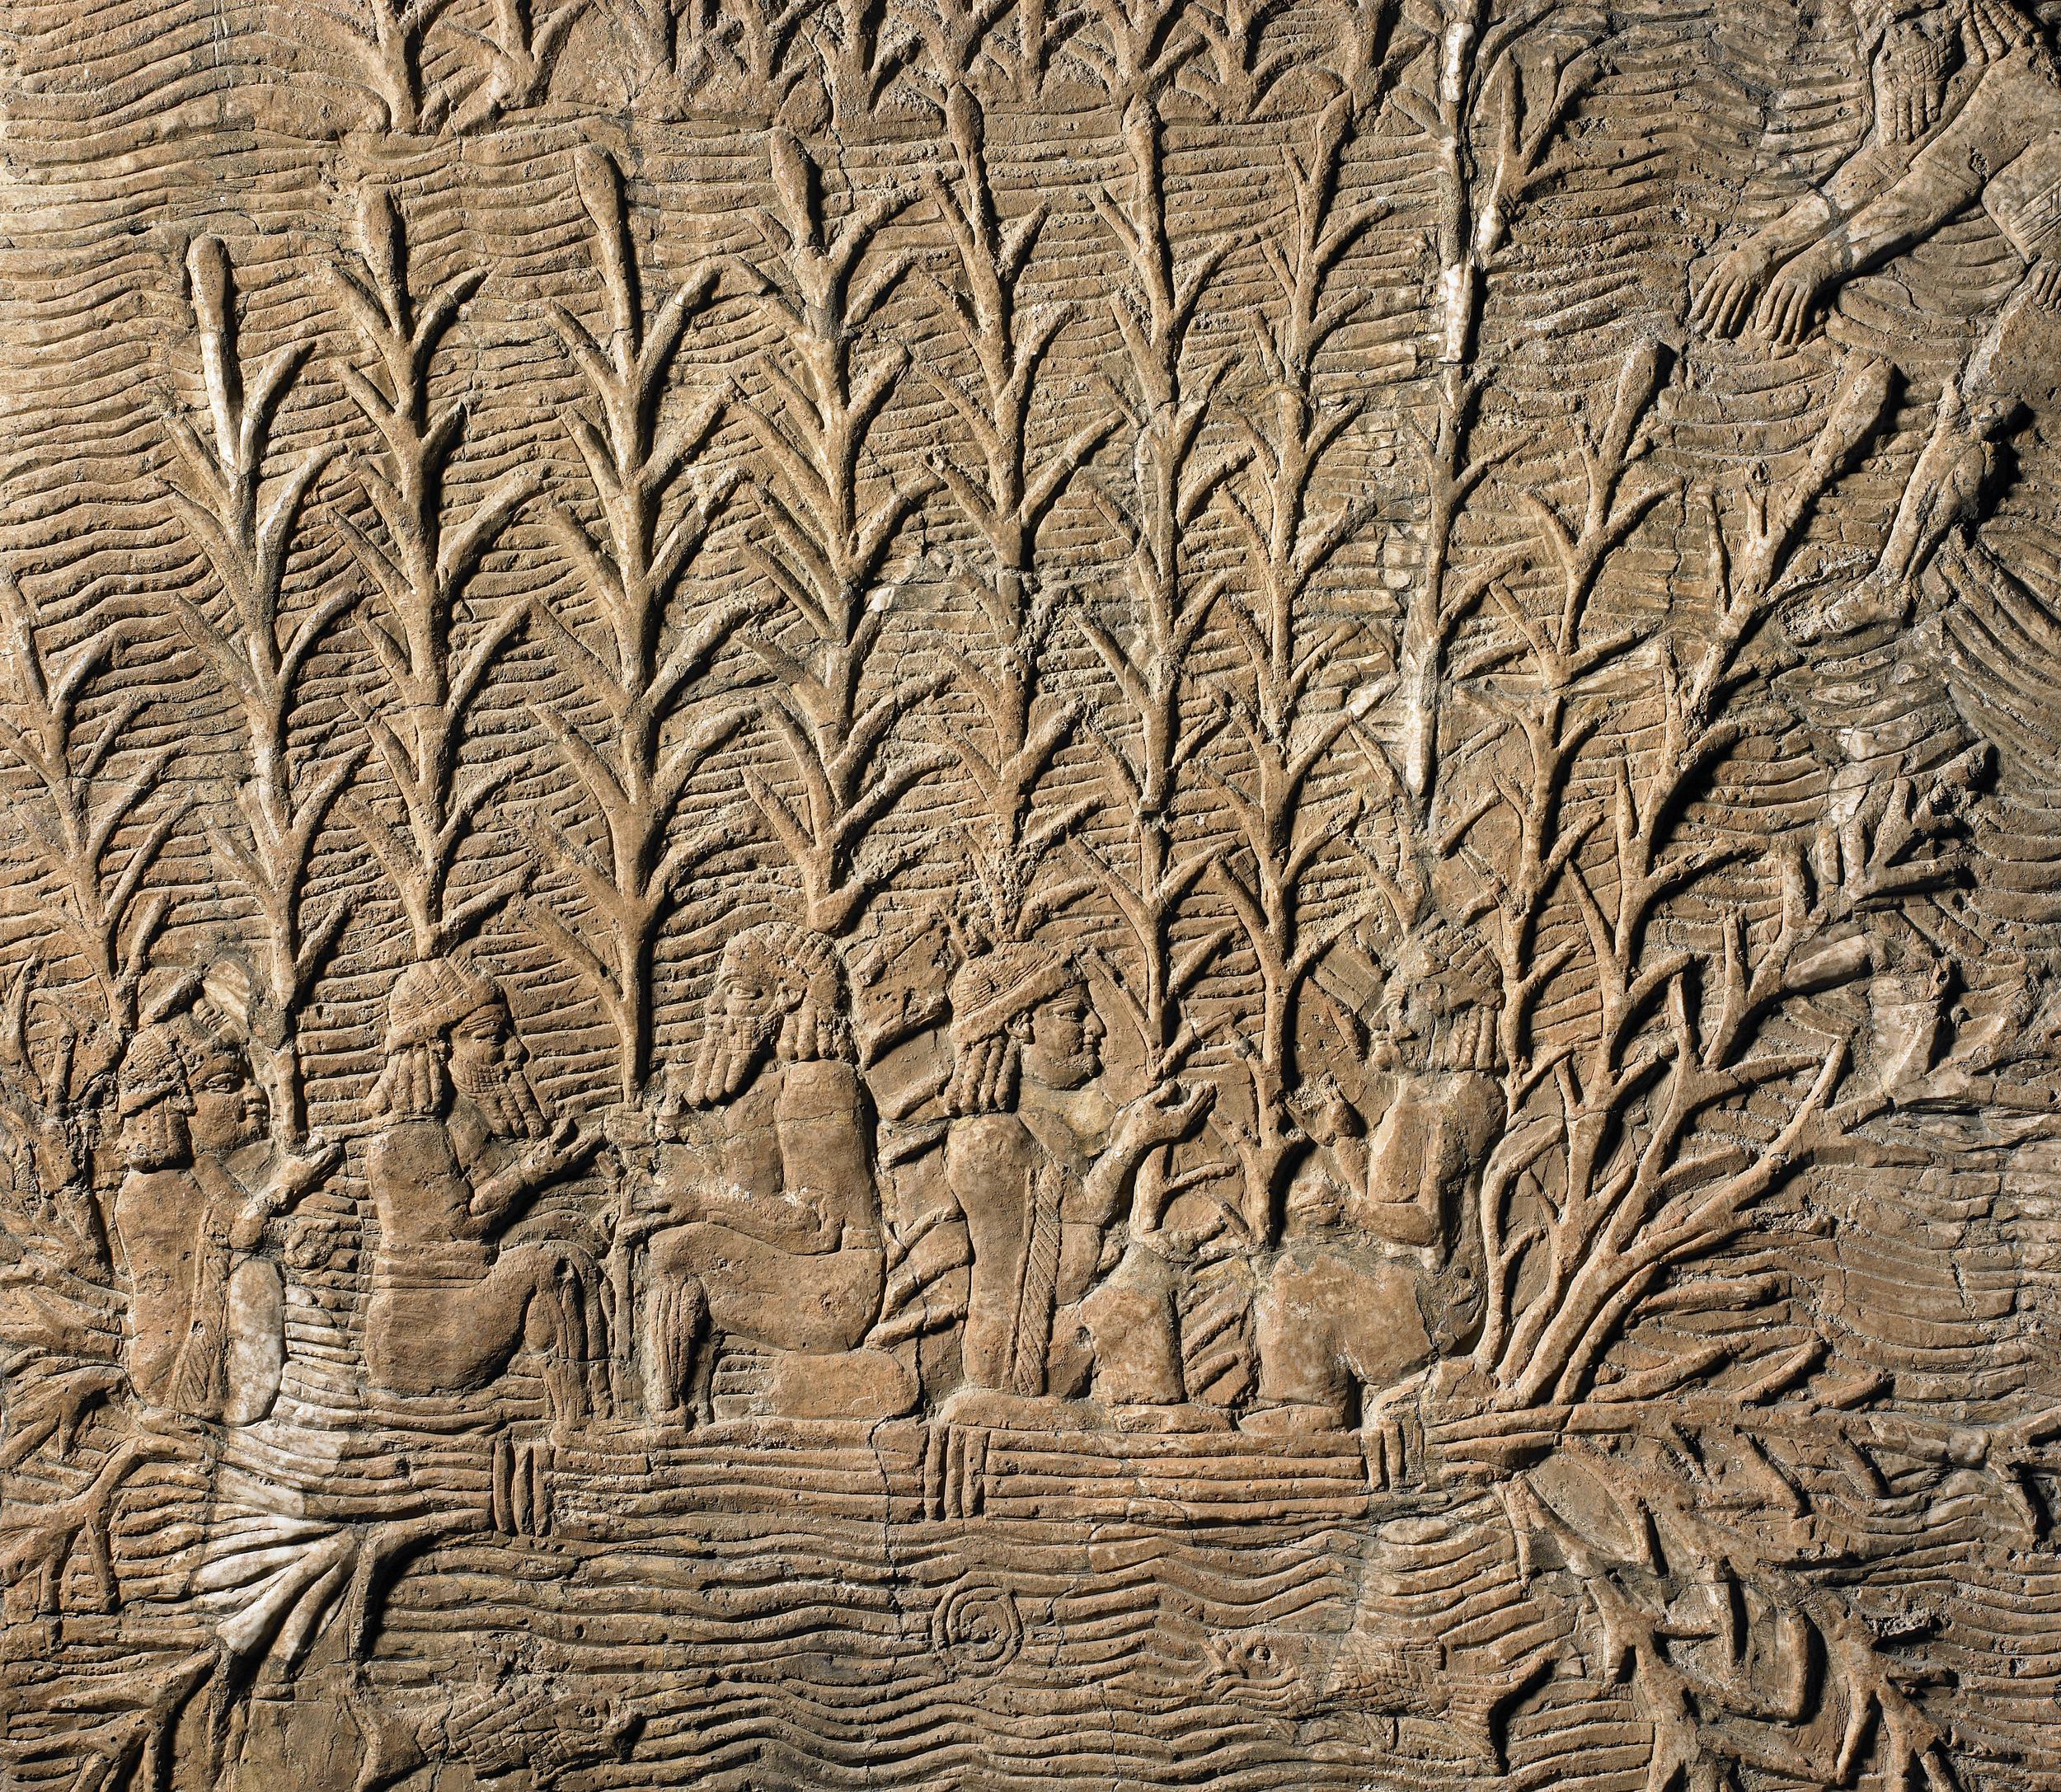 An ancient stone carving showing people in vegetation.